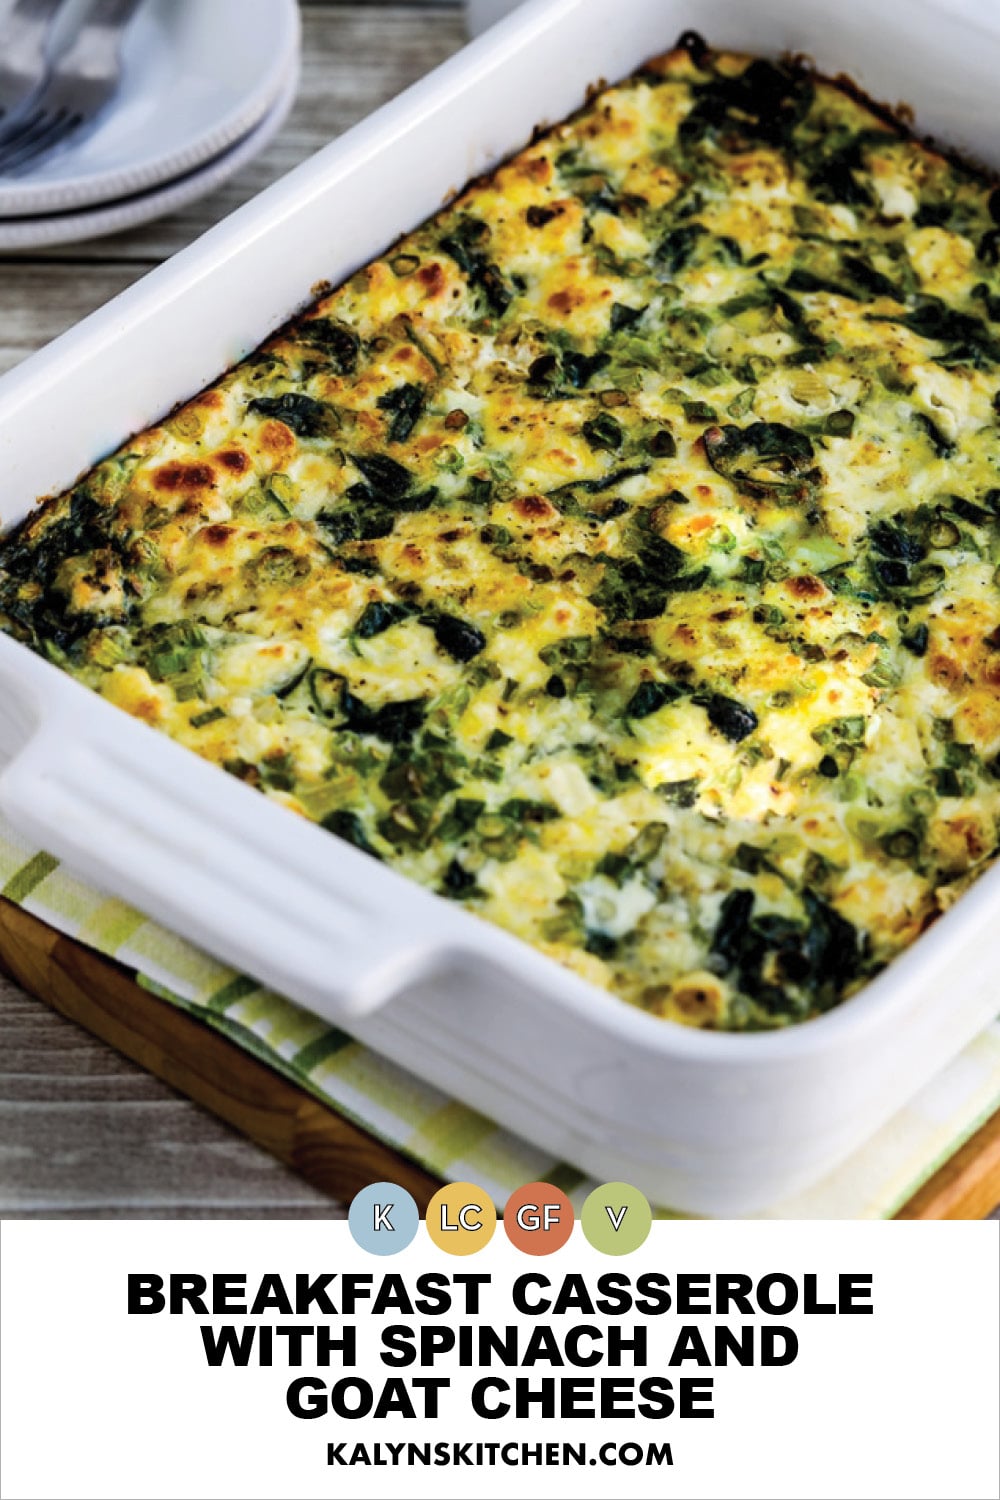 Pinterest image of Breakfast Casserole with Spinach and Goat Cheese